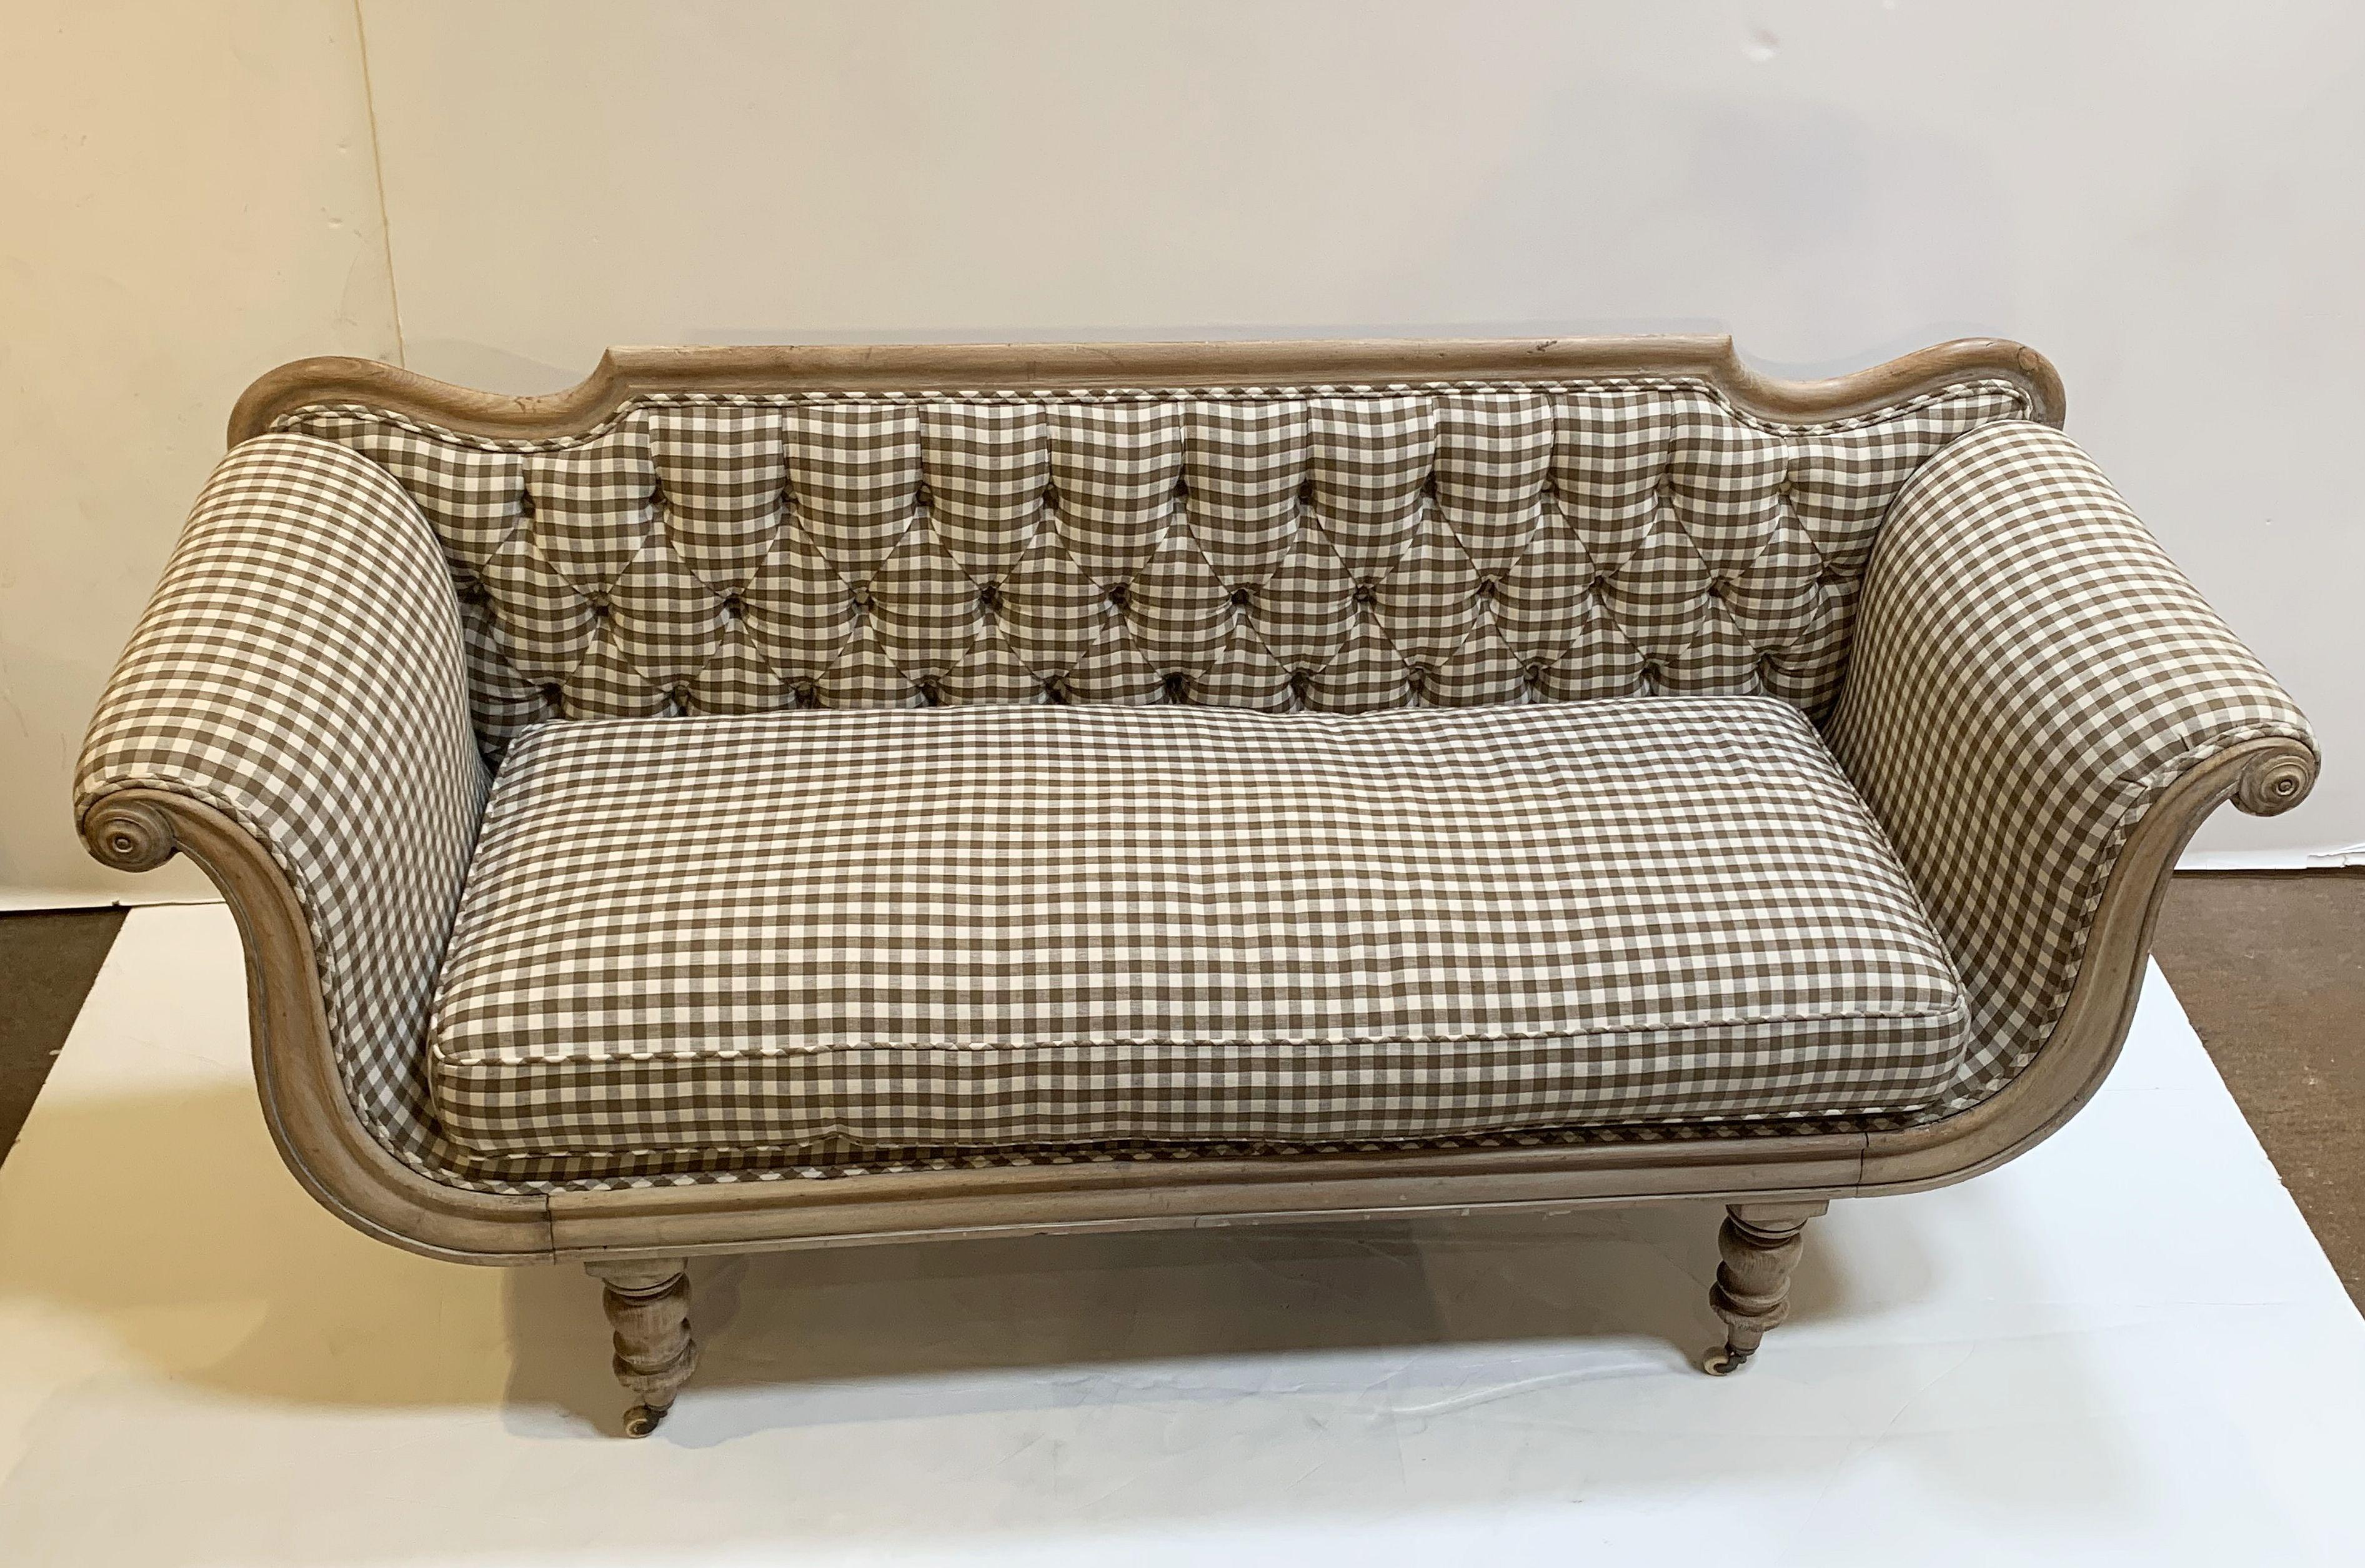 19th Century Swedish Regency Sofa with Upholstered Seating